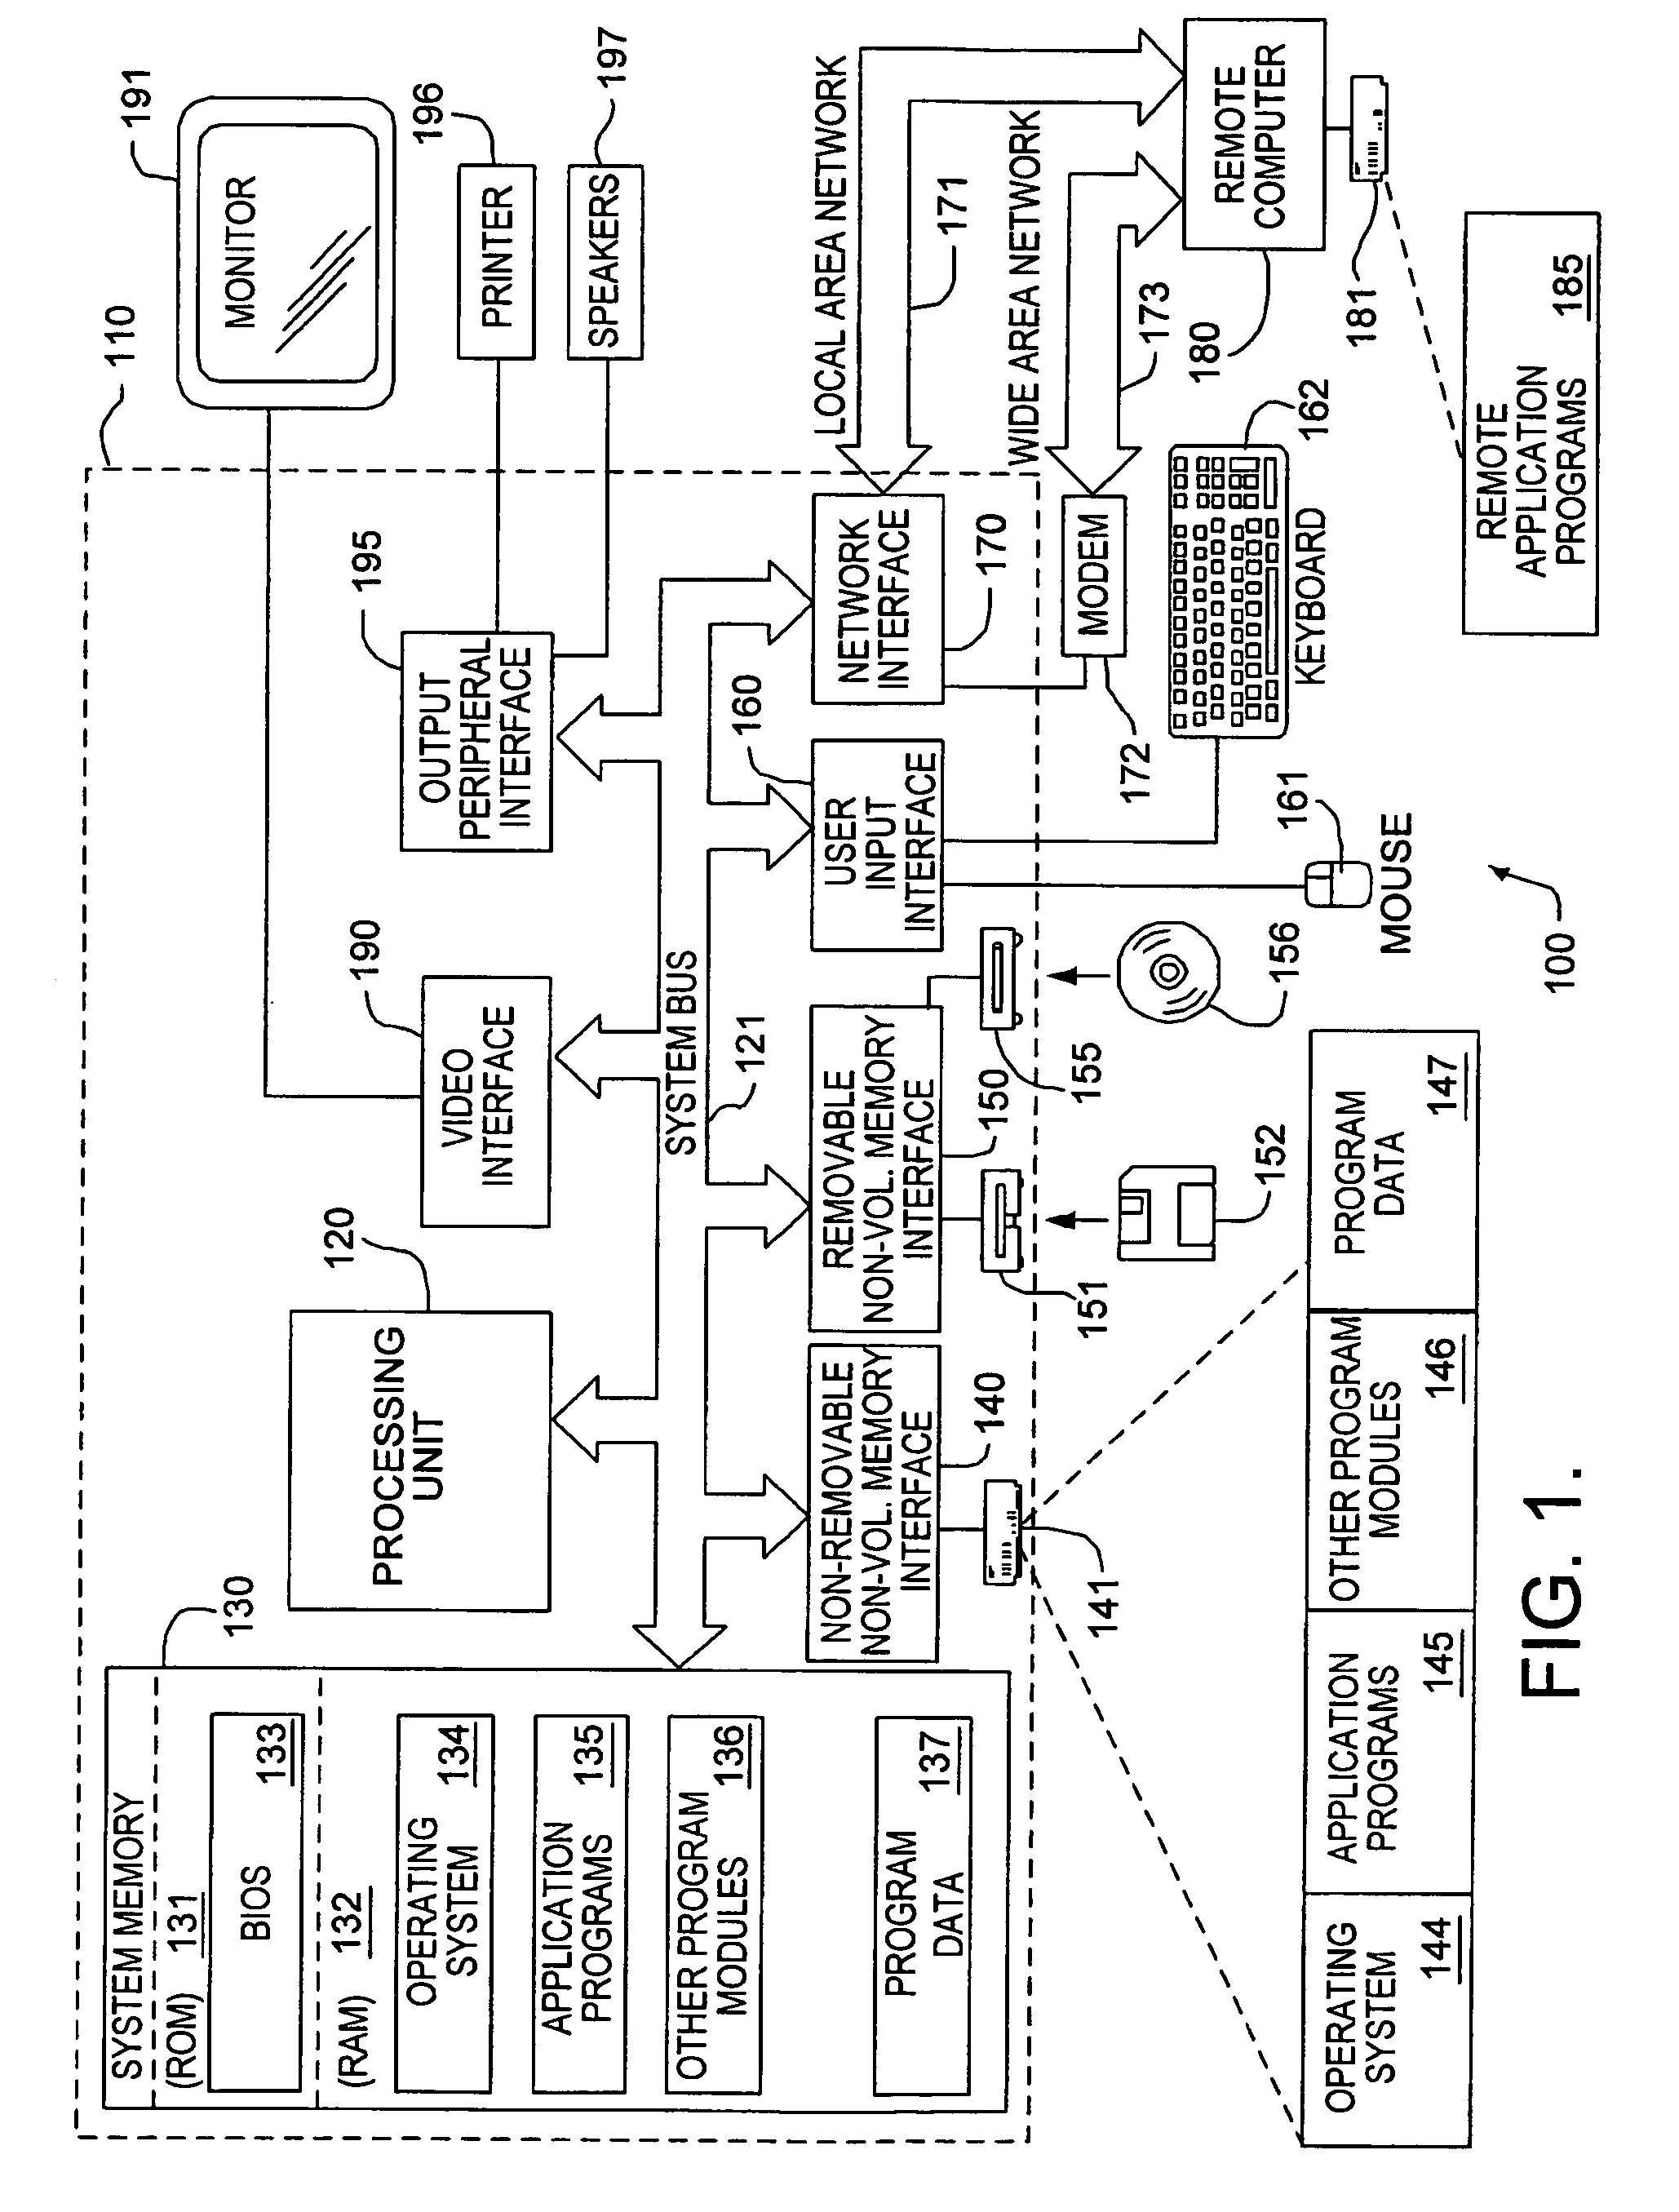 Systems and methods for determining relative placement of content items on a rendered page